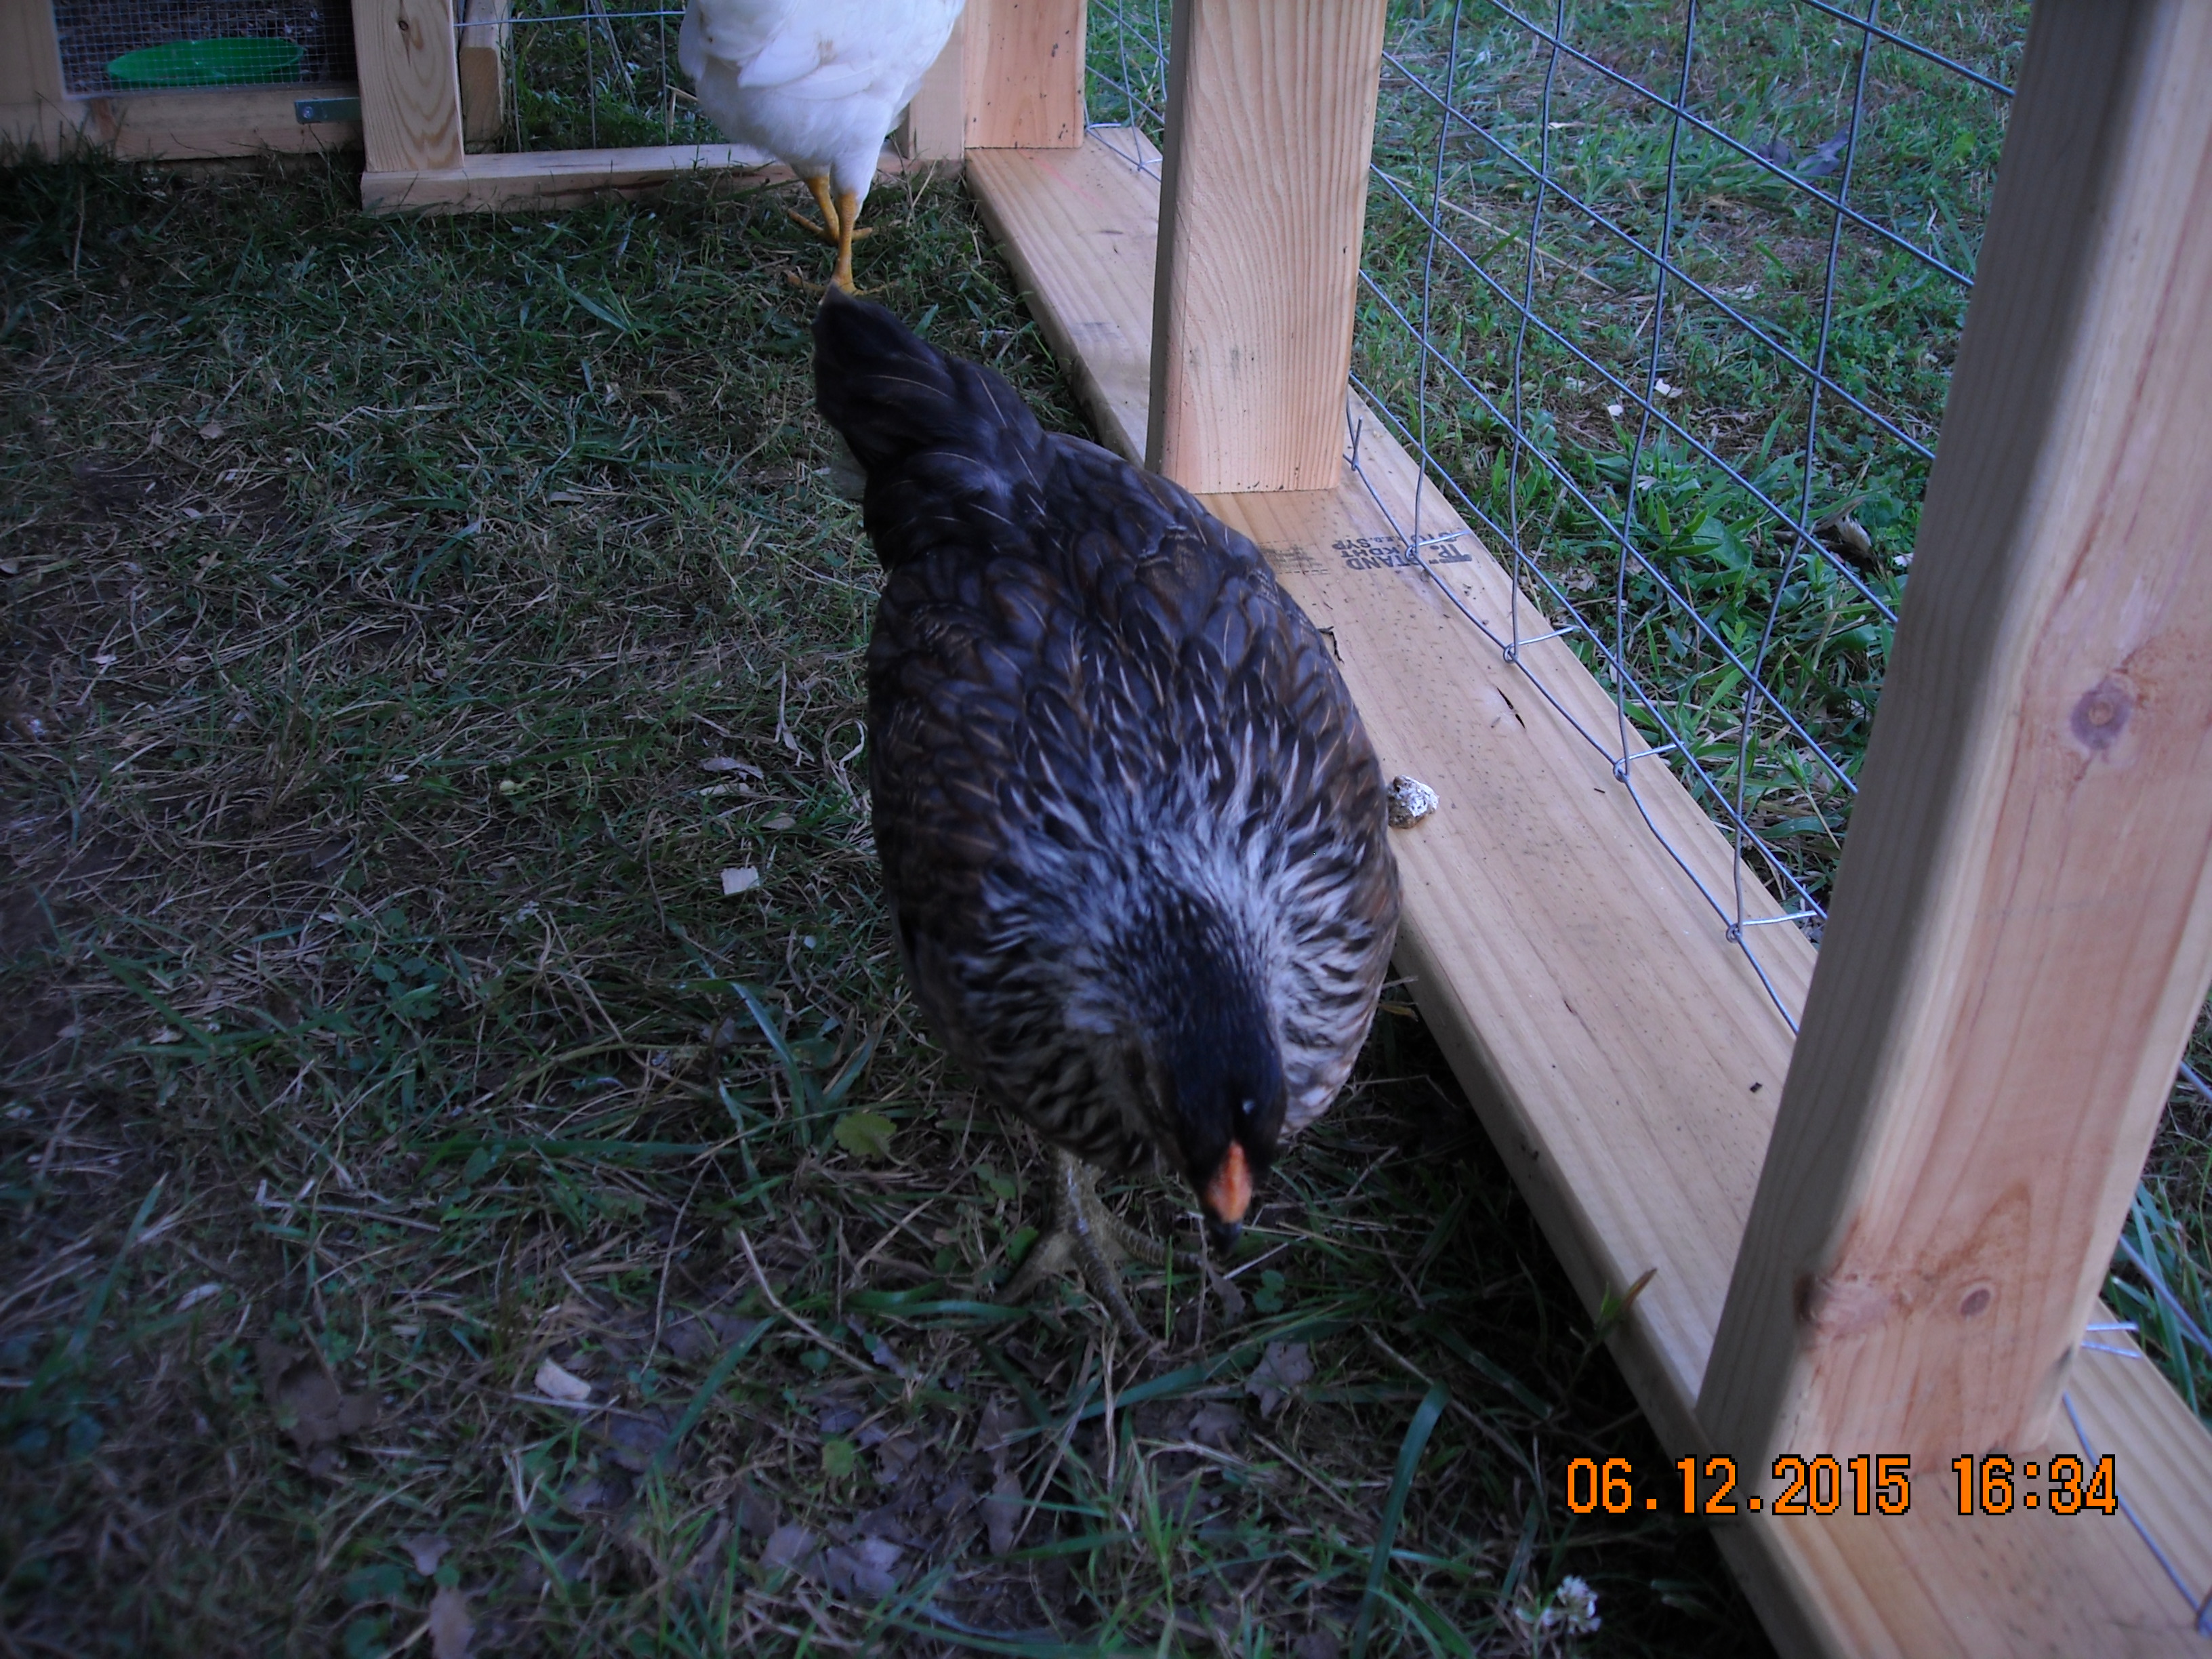 Do not know what breed of chicken? 
She Has green legs. the guy at the feedstore told me she will lay green eggs.